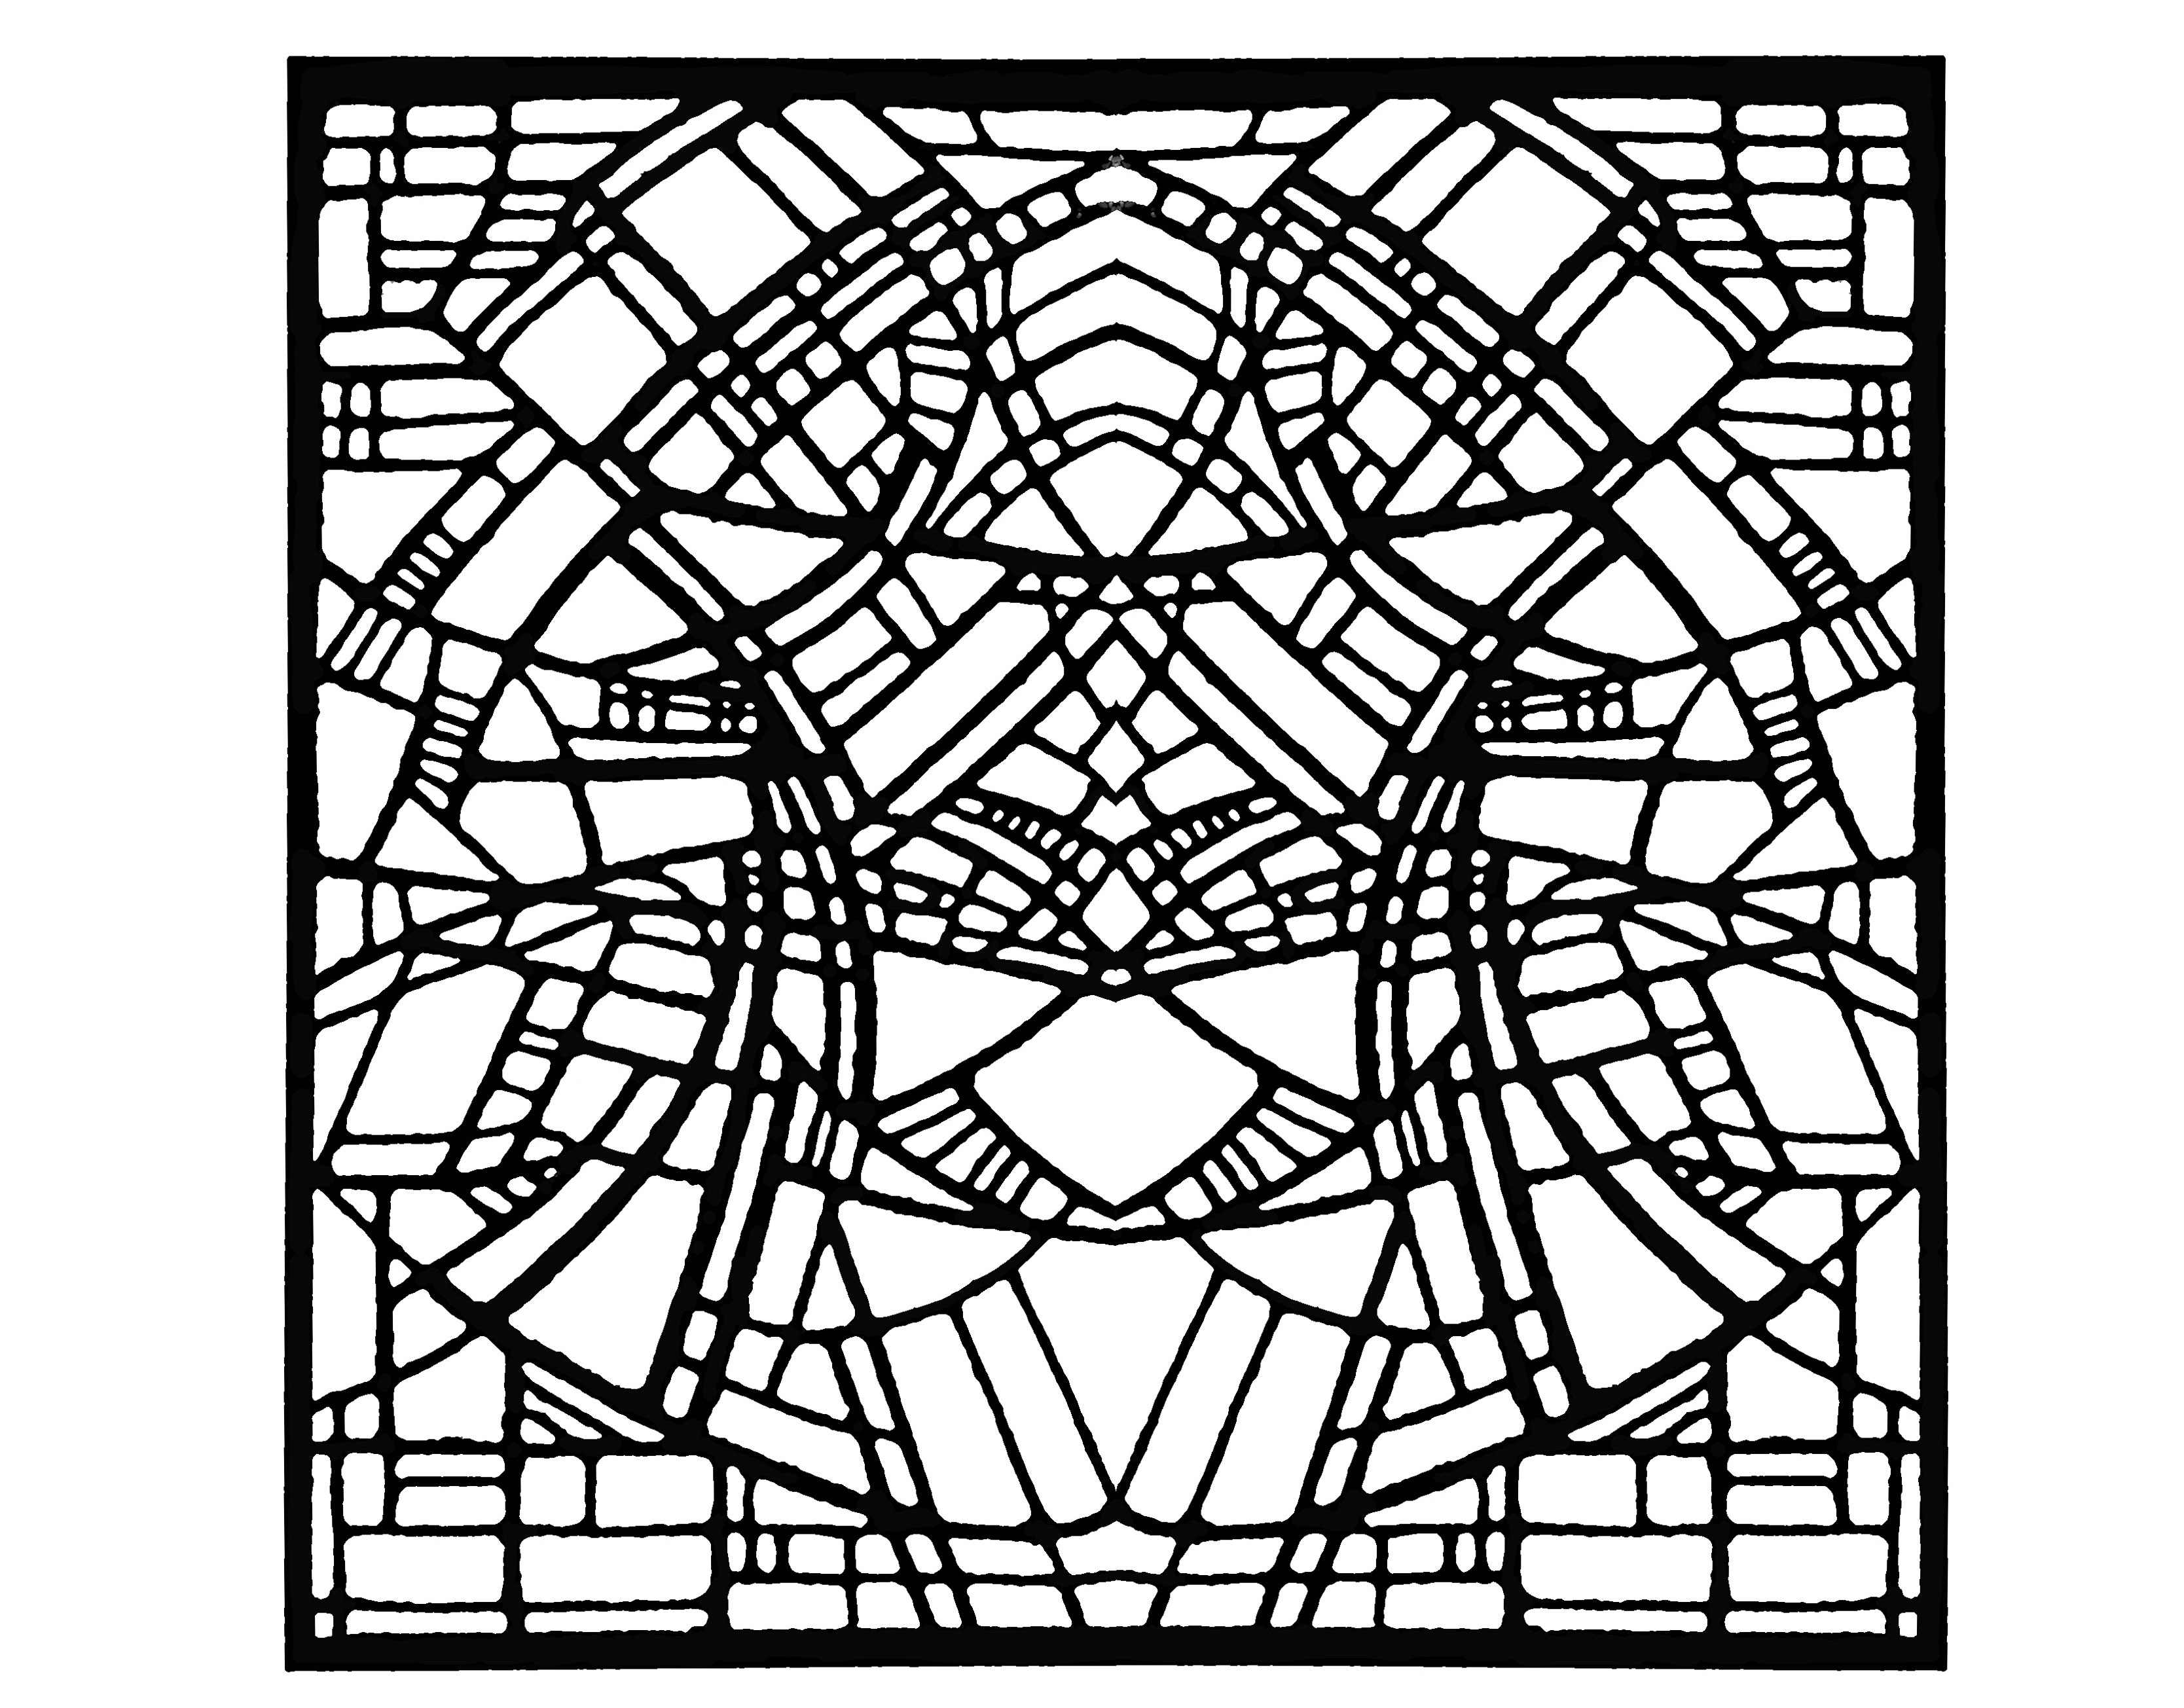 Coloring page made from a modern Stained glass : Church in Belgium, 1986 - Square version